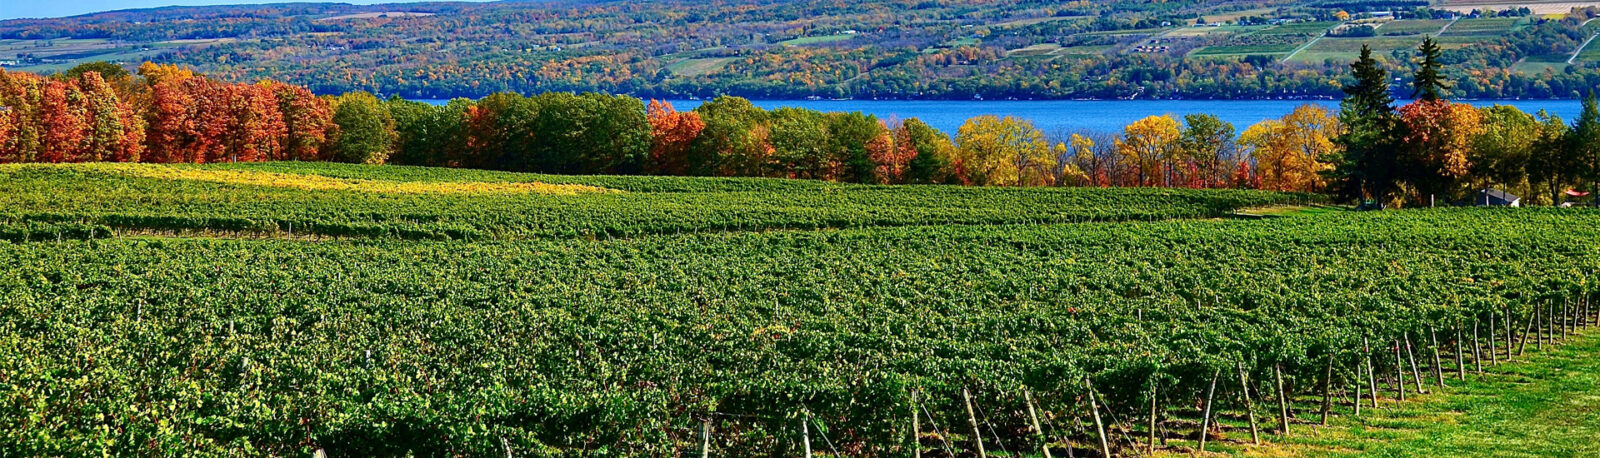 Fall foliage and a vineyard of grapevines.